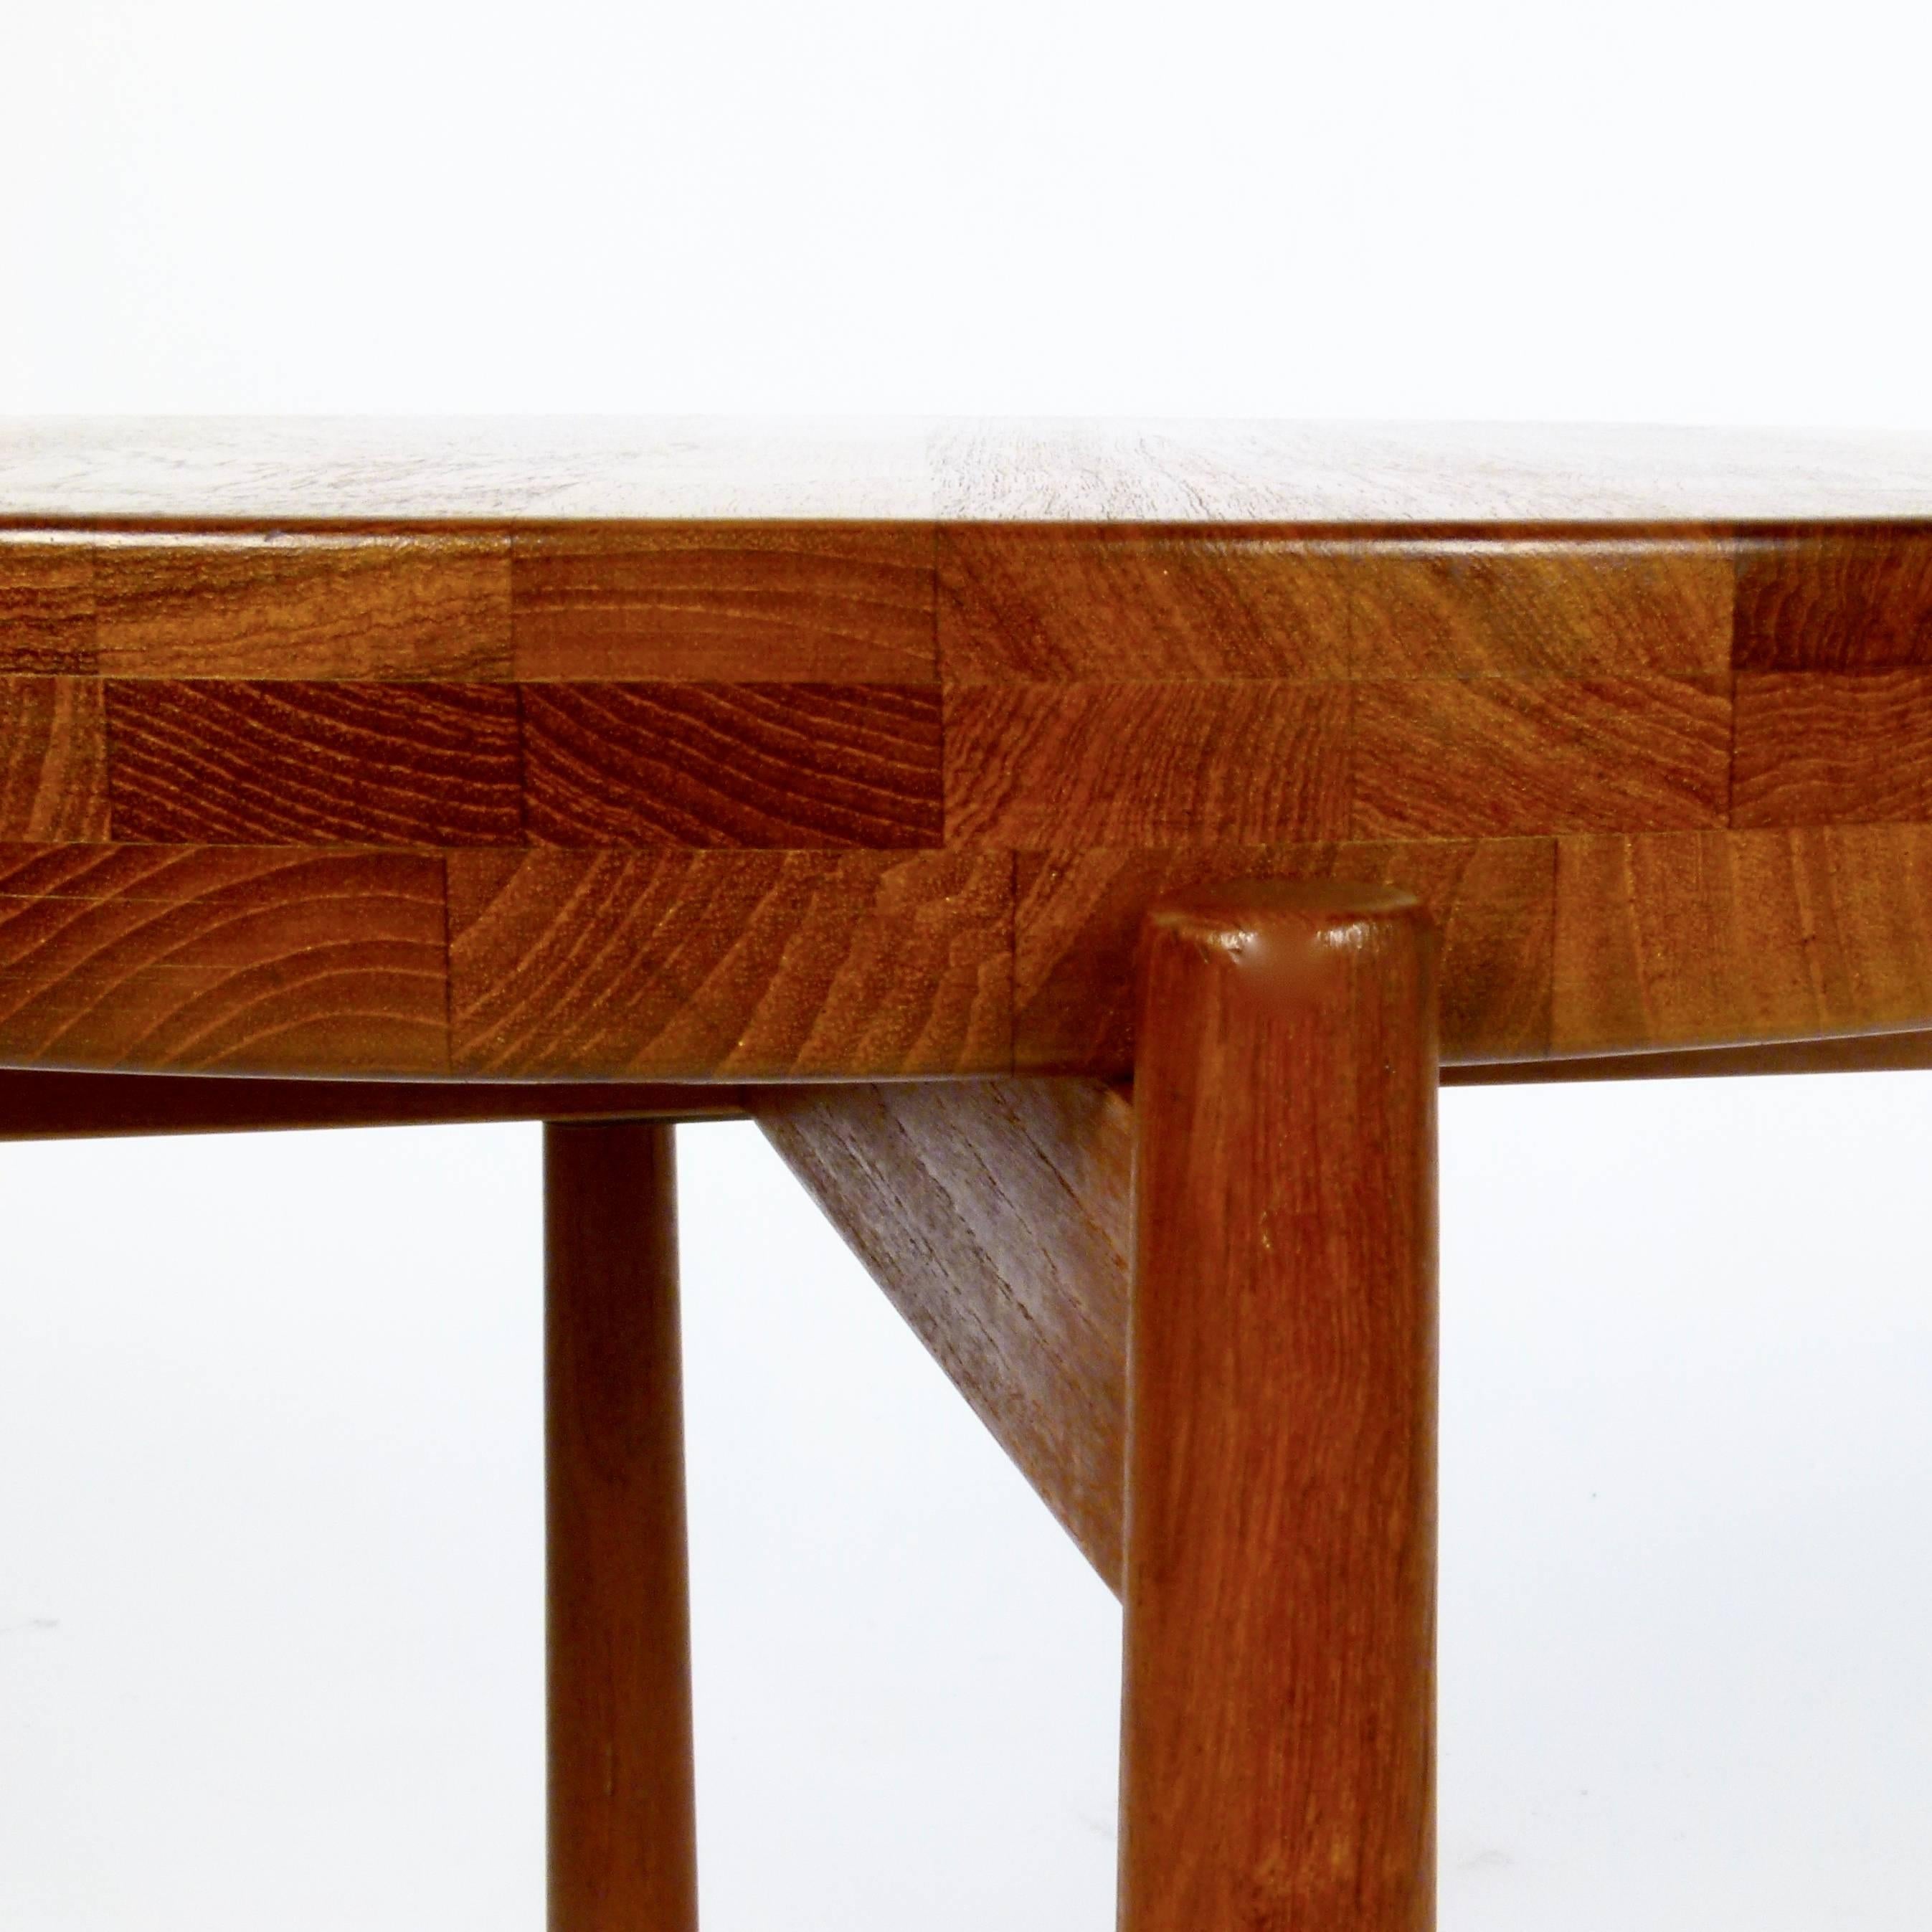 Unique teak flip-top side table designed by Jens Quistgaard for DUX, Sweden, circa 1965. Fully finished, solid teak top is concaved on one side and flat on the other.